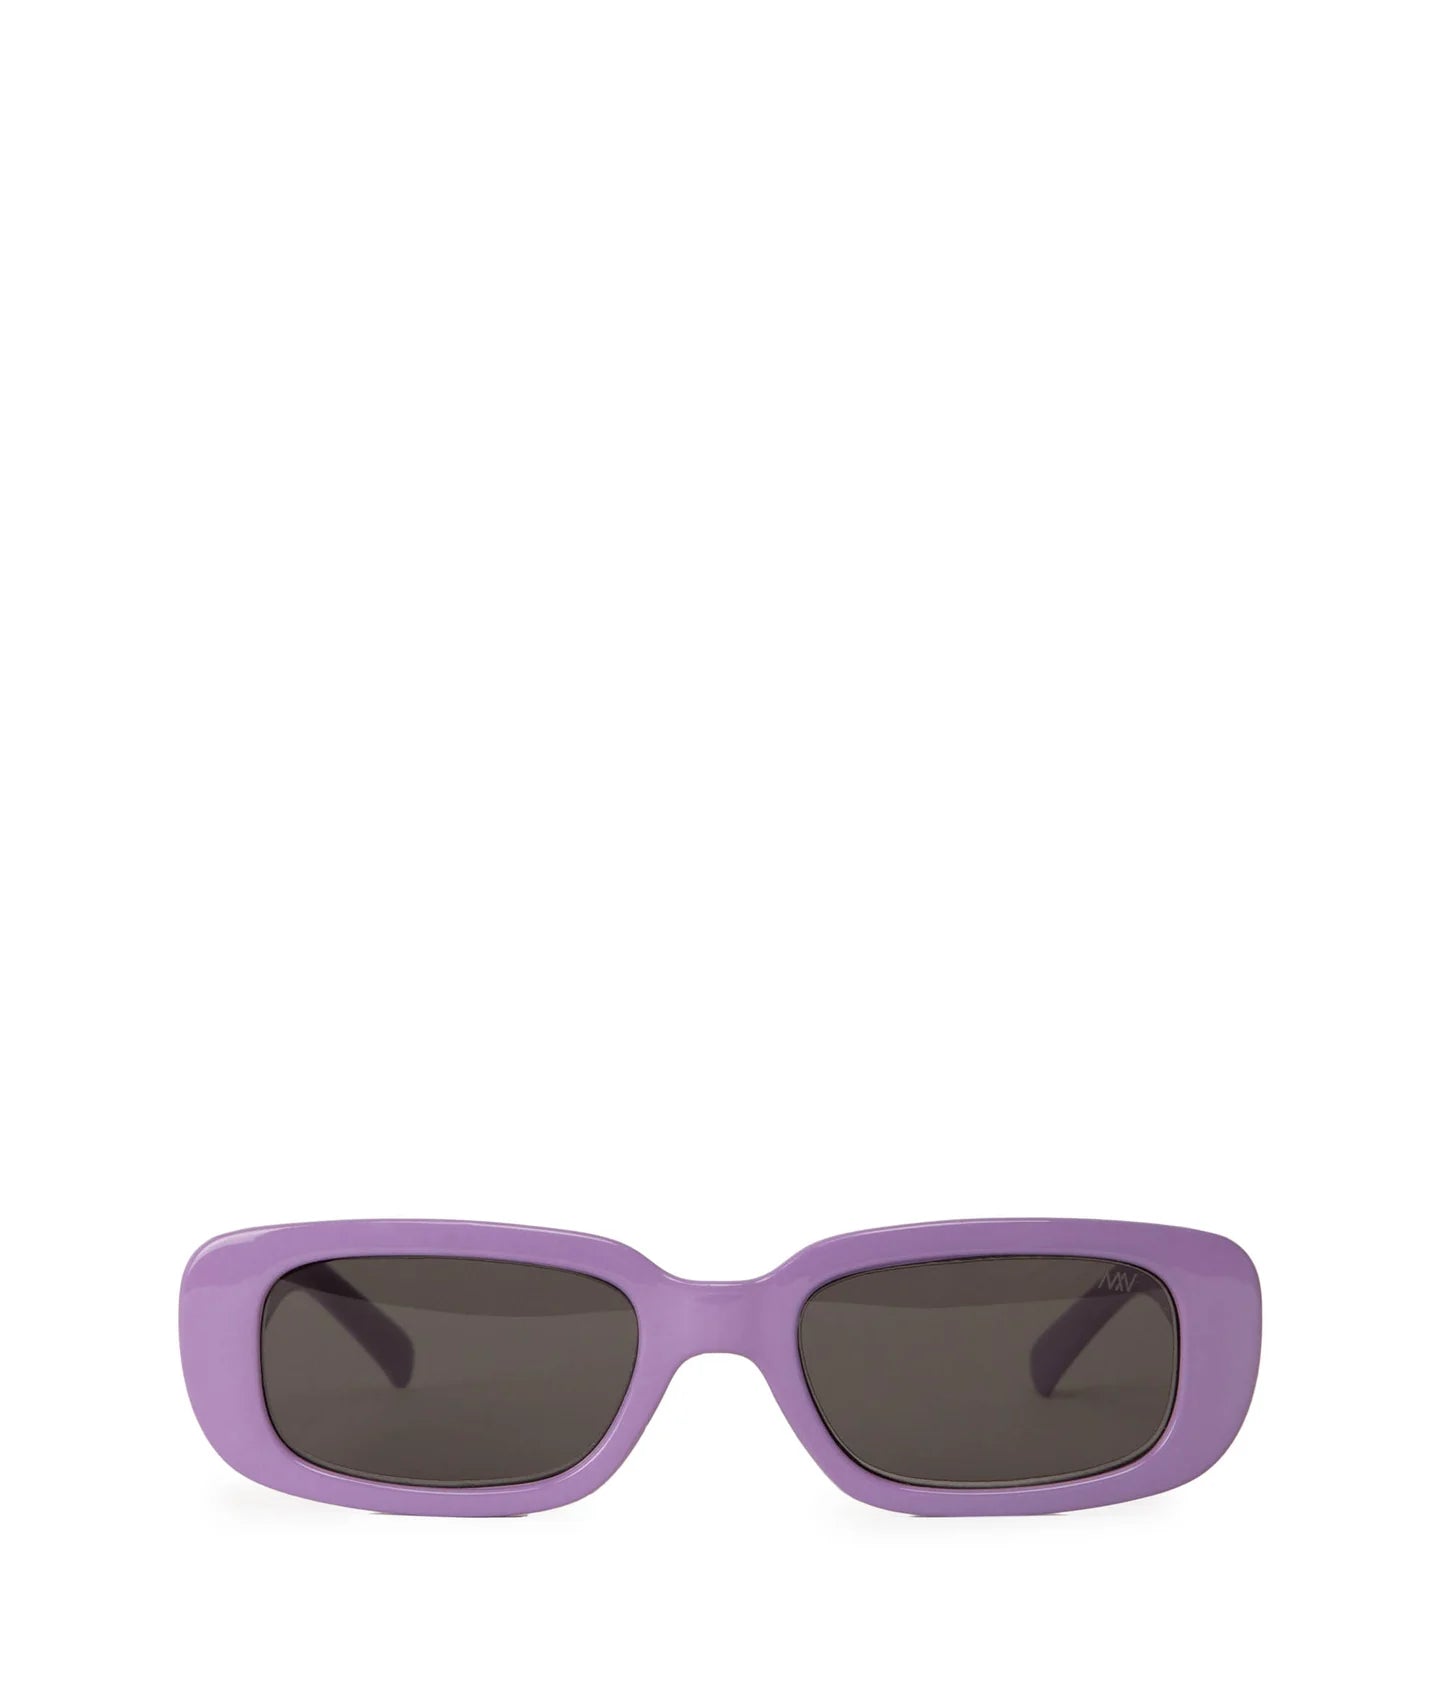 Kiin-2 Recycled Sunglasses in Lilac with Case